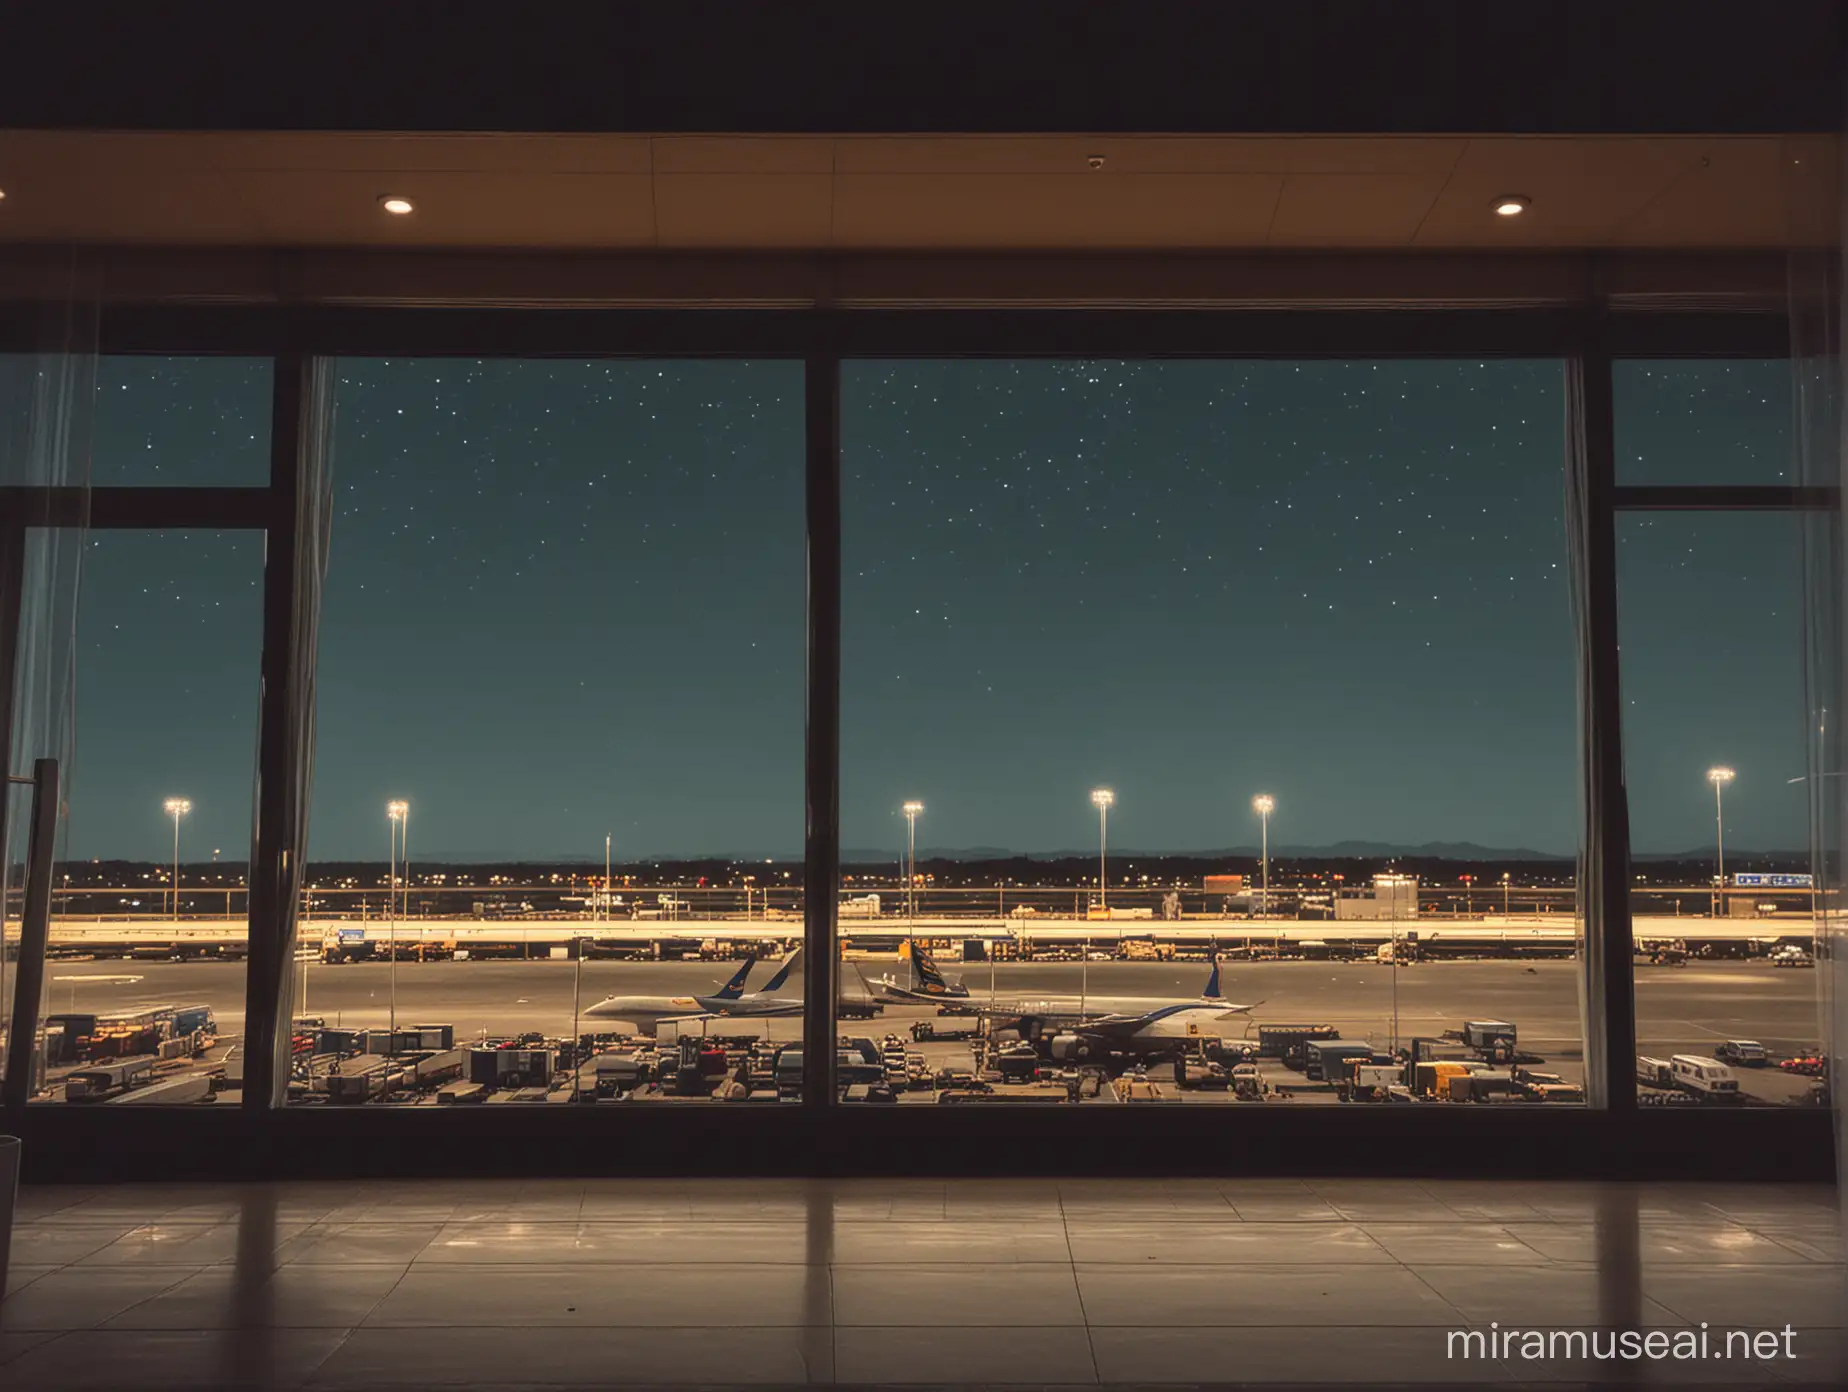 Wes Anderson Style Airport Scene Large Window Overlooking Nighttime Sky